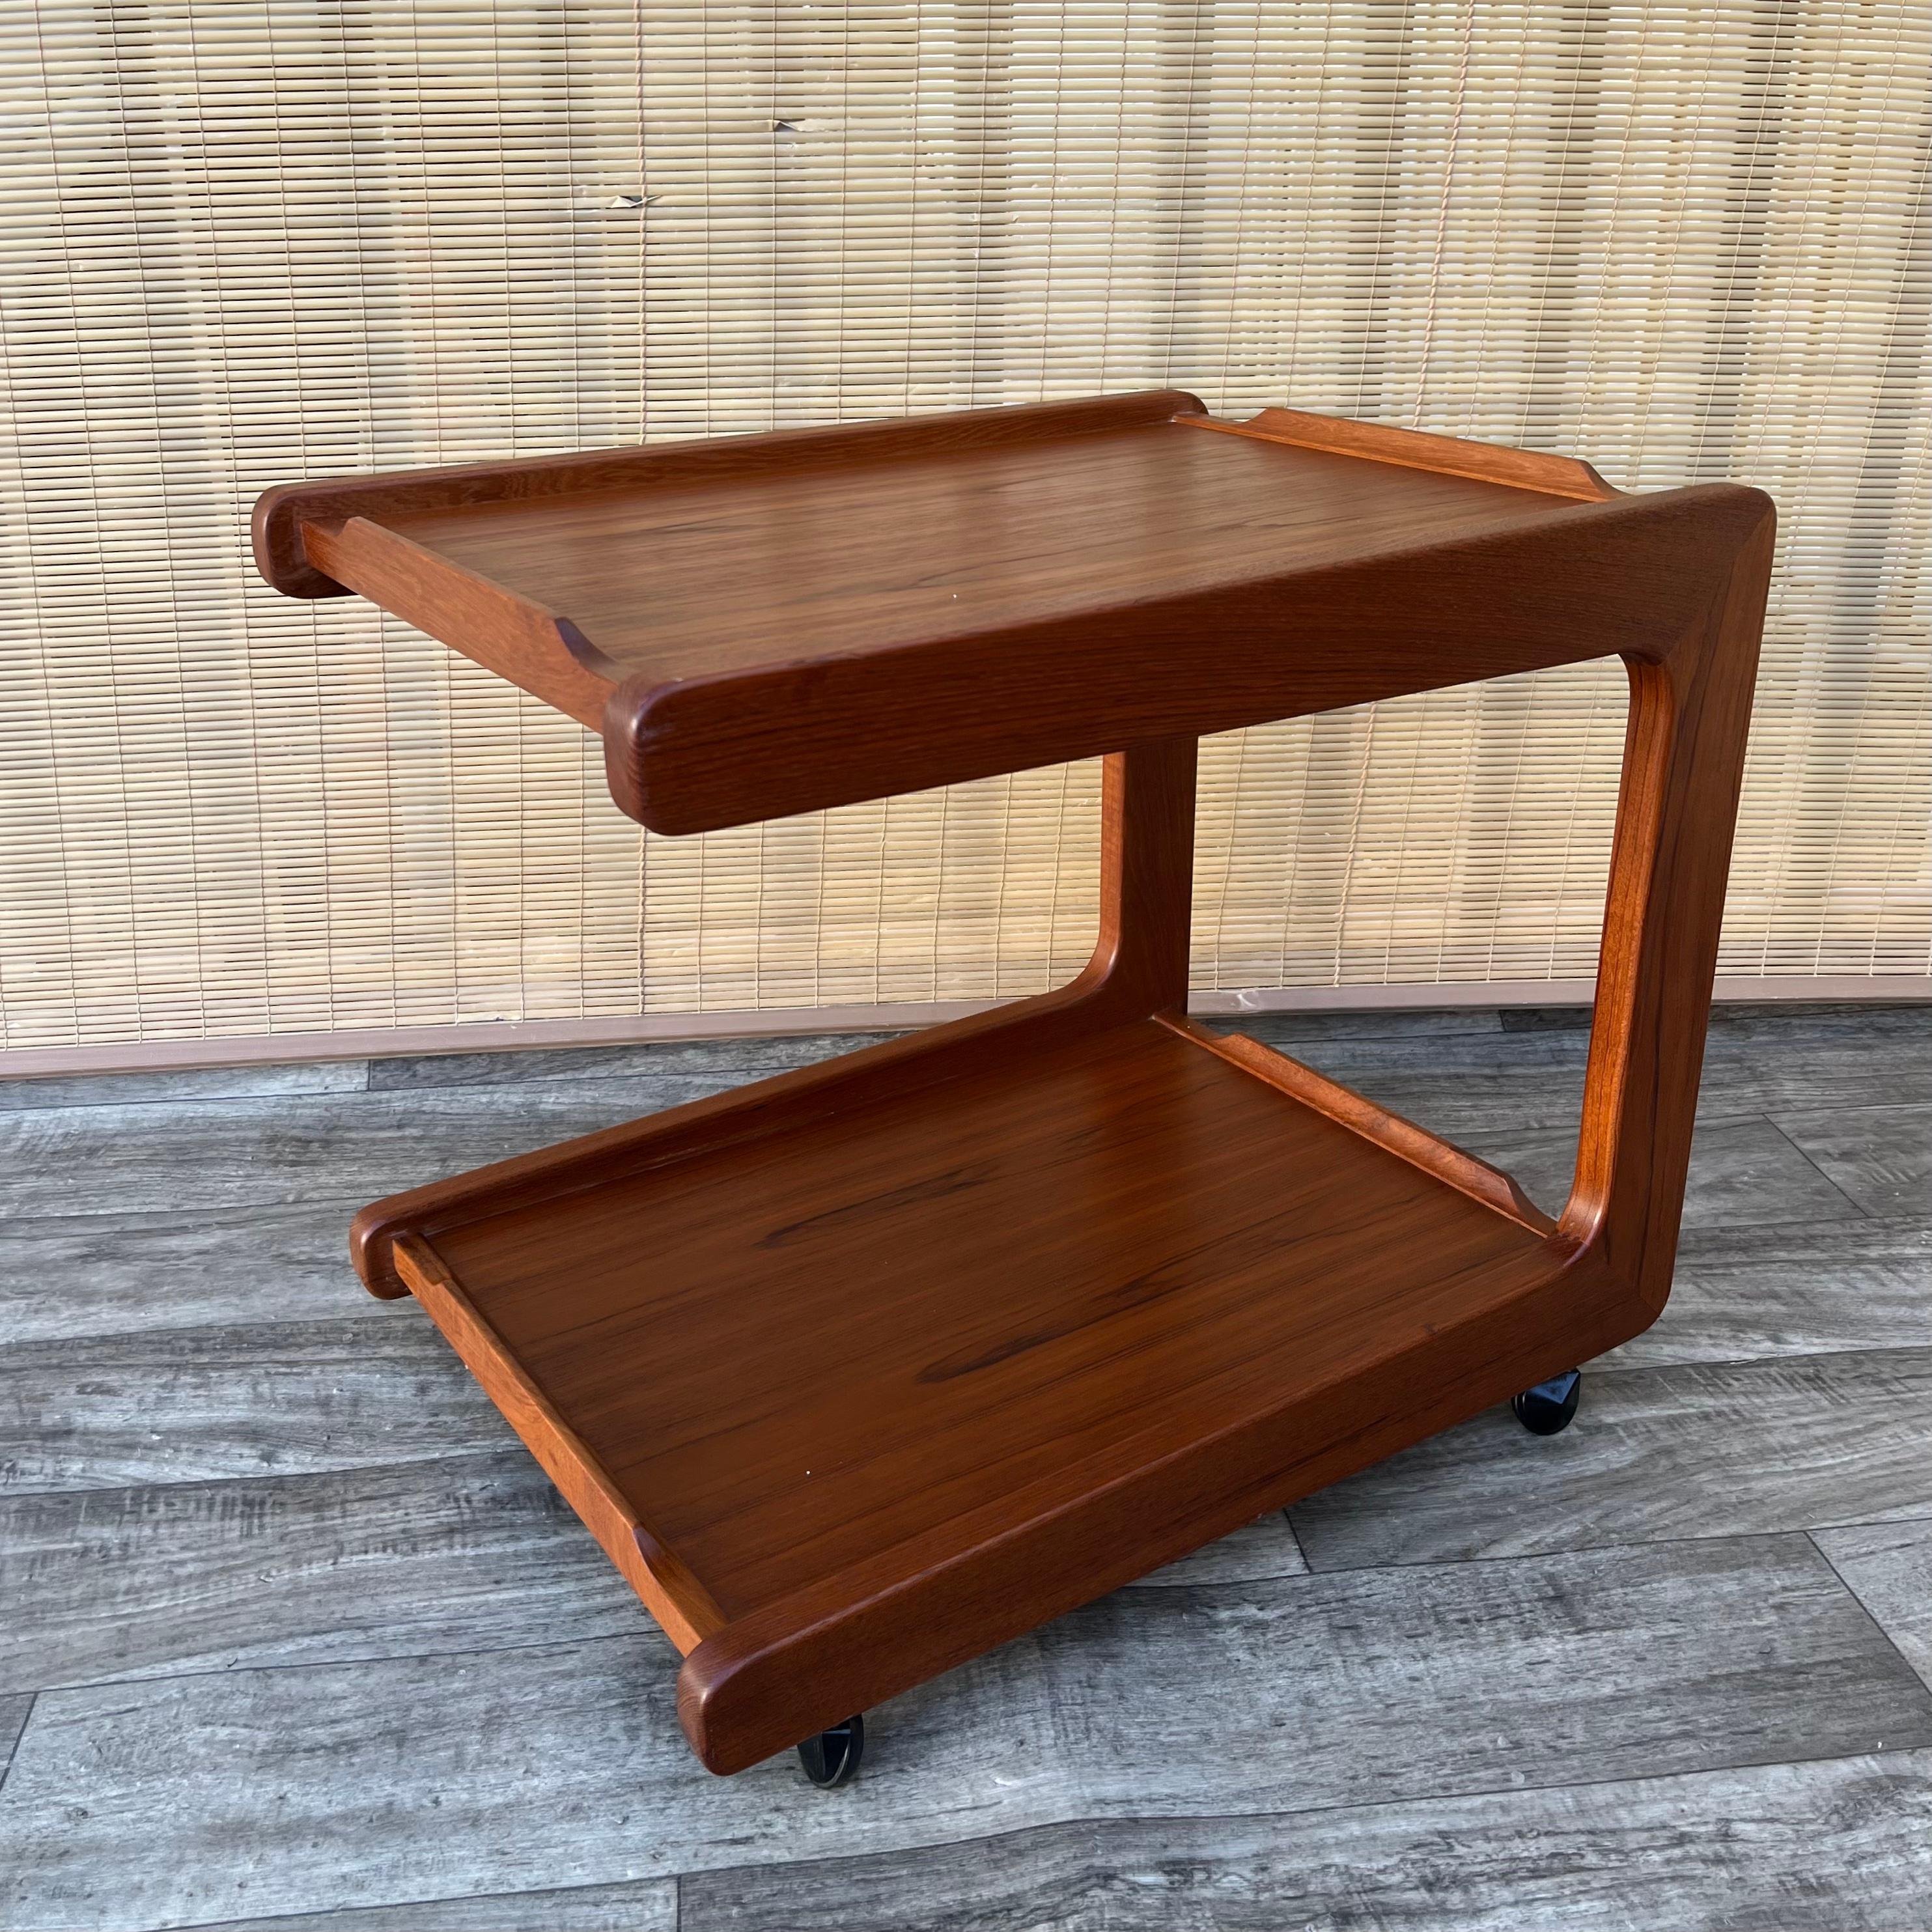 Vintage Mid Century Modern Danish Teak Serving Cart, Circa 1960s
Features a sleek Mid Century Scandinavian C-shaped Design with a cantilever top tier, casters for easy mobility, and a beautiful teak wood grain. 
In excellent near mint original